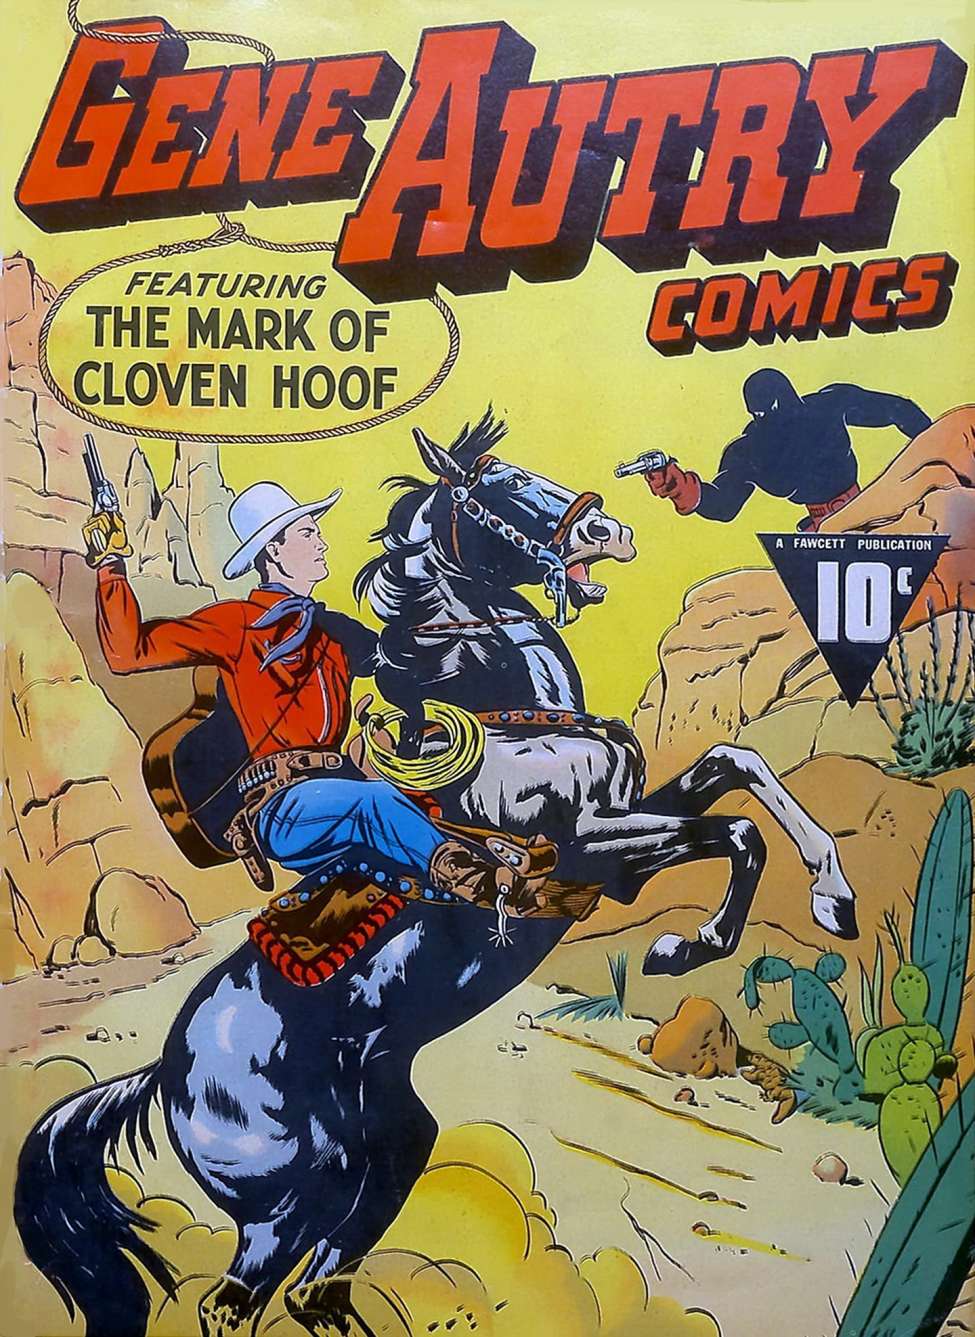 Book Cover For Gene Autry Comics 1